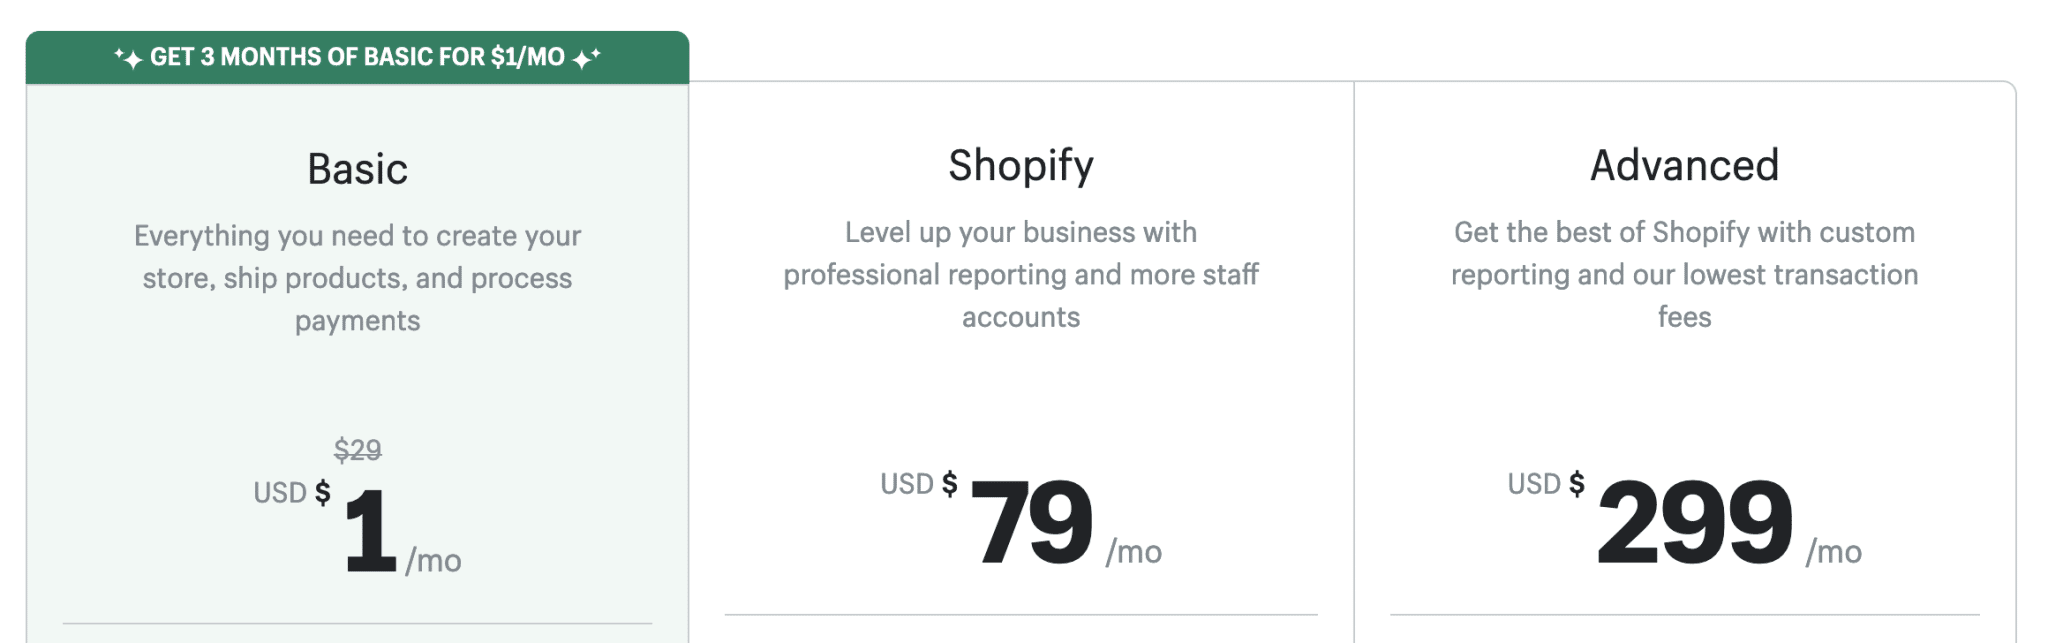 Shopify prices.